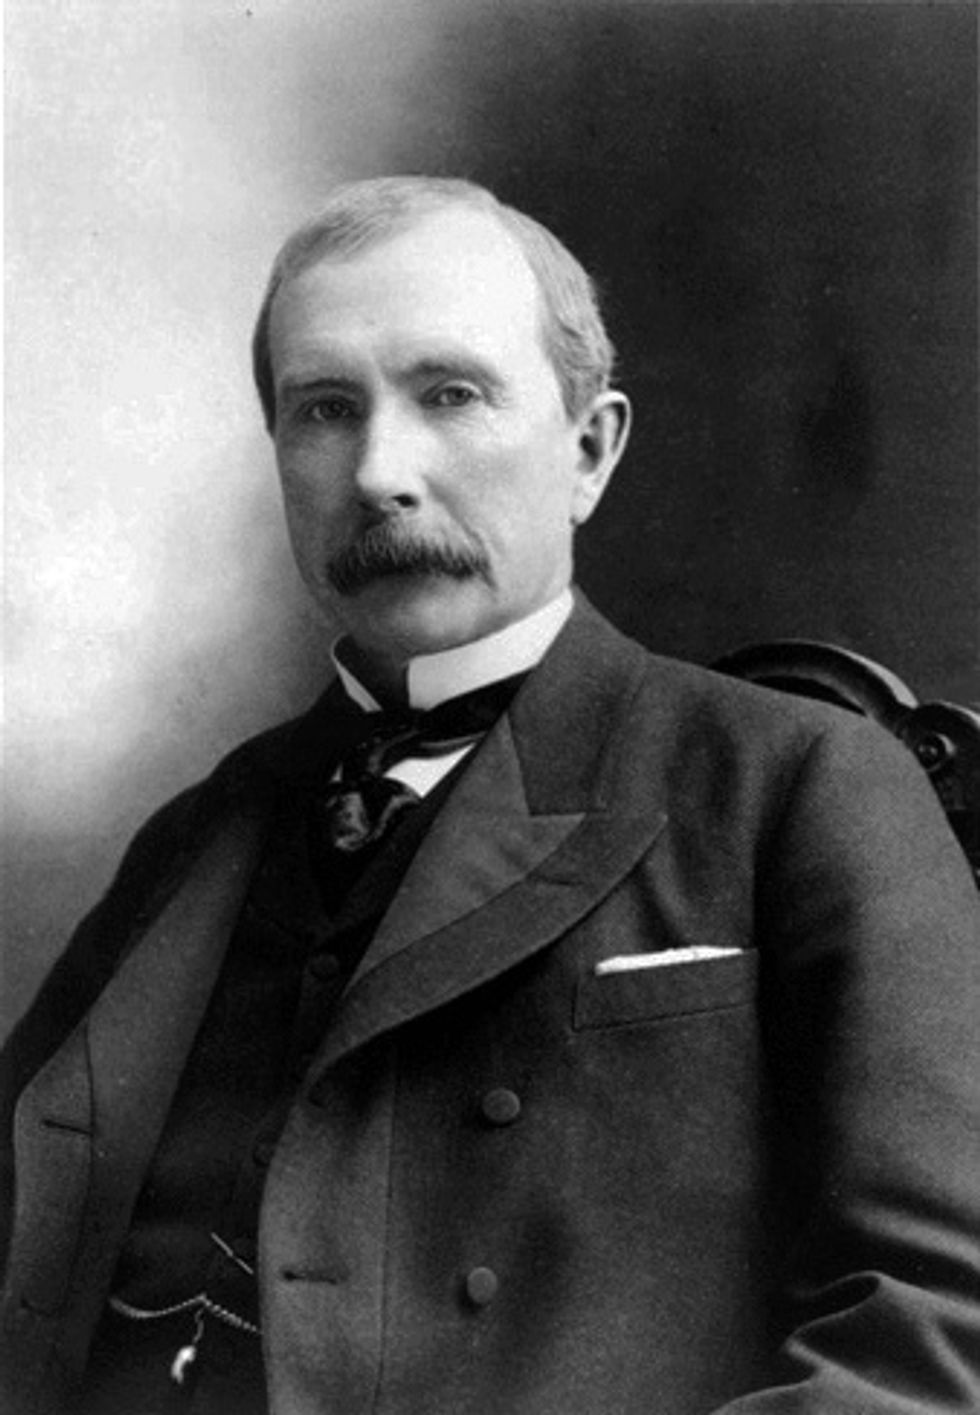 John D. Rockefeller's Story In The Oil Industry Shows That He Was More Than Just A Rich Entrepreneur